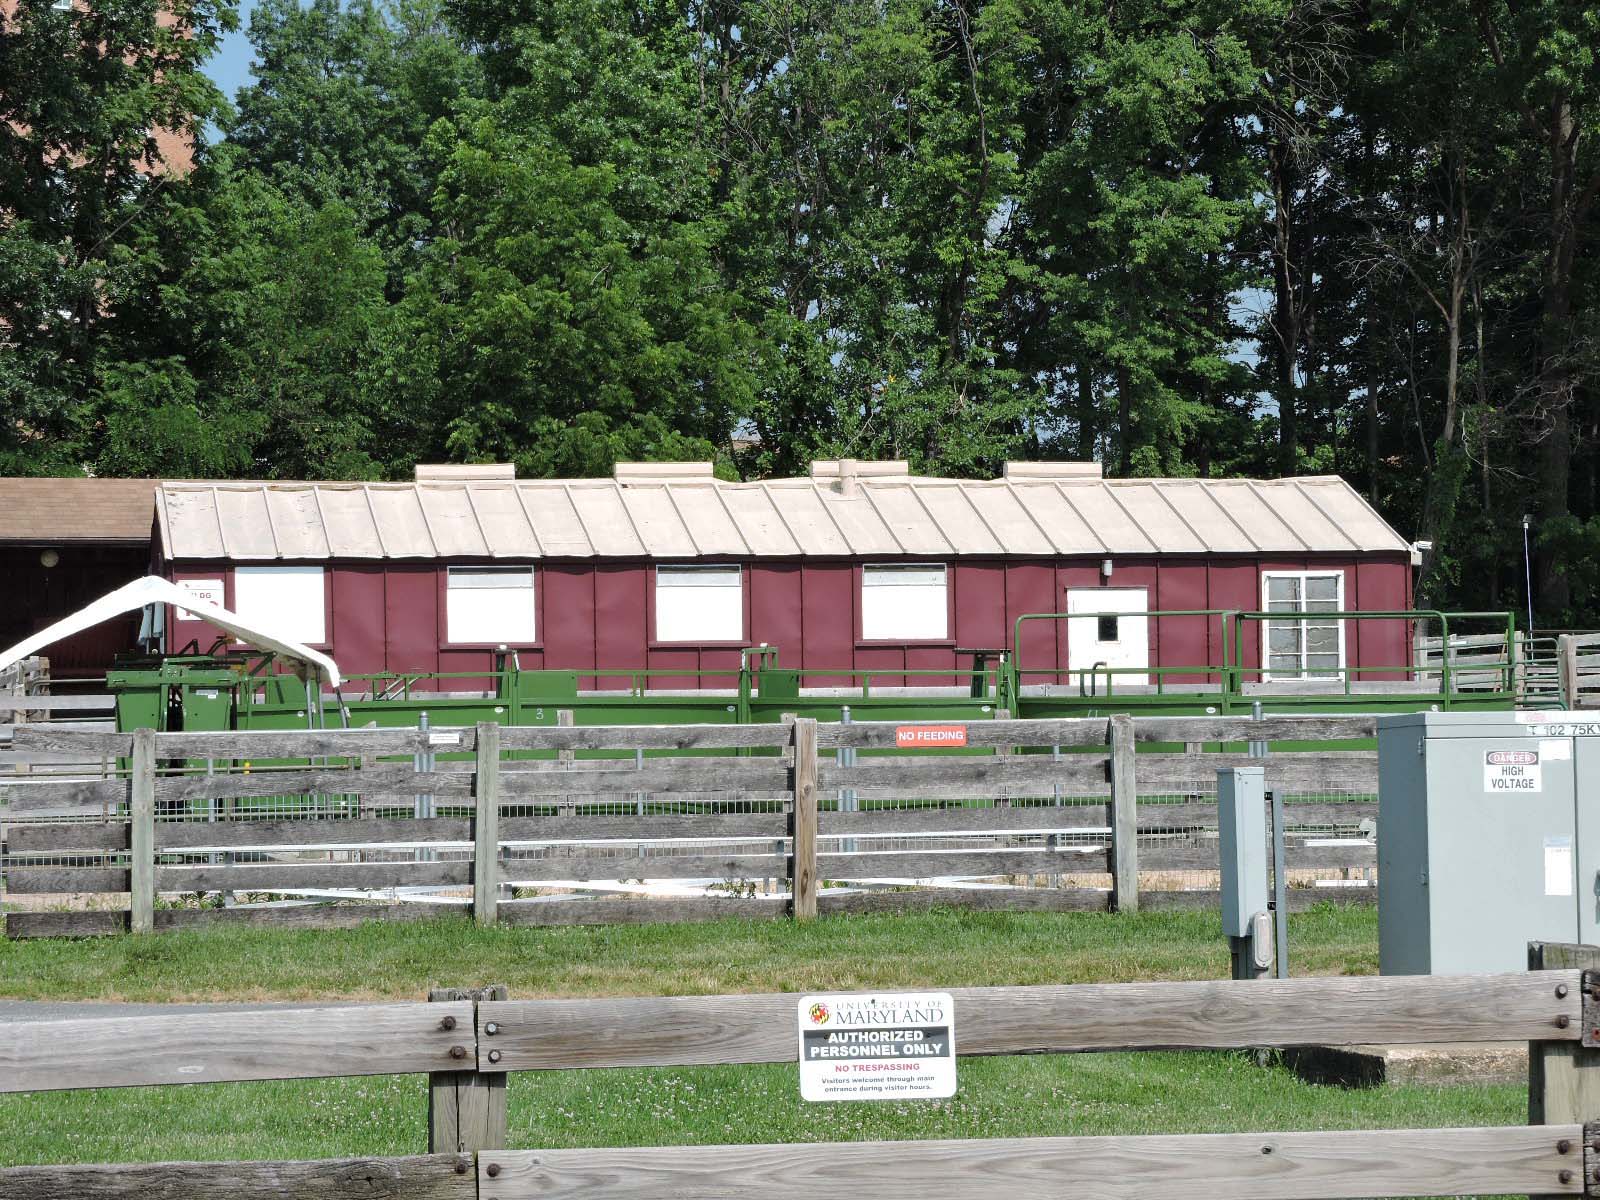 POULTRY BARN